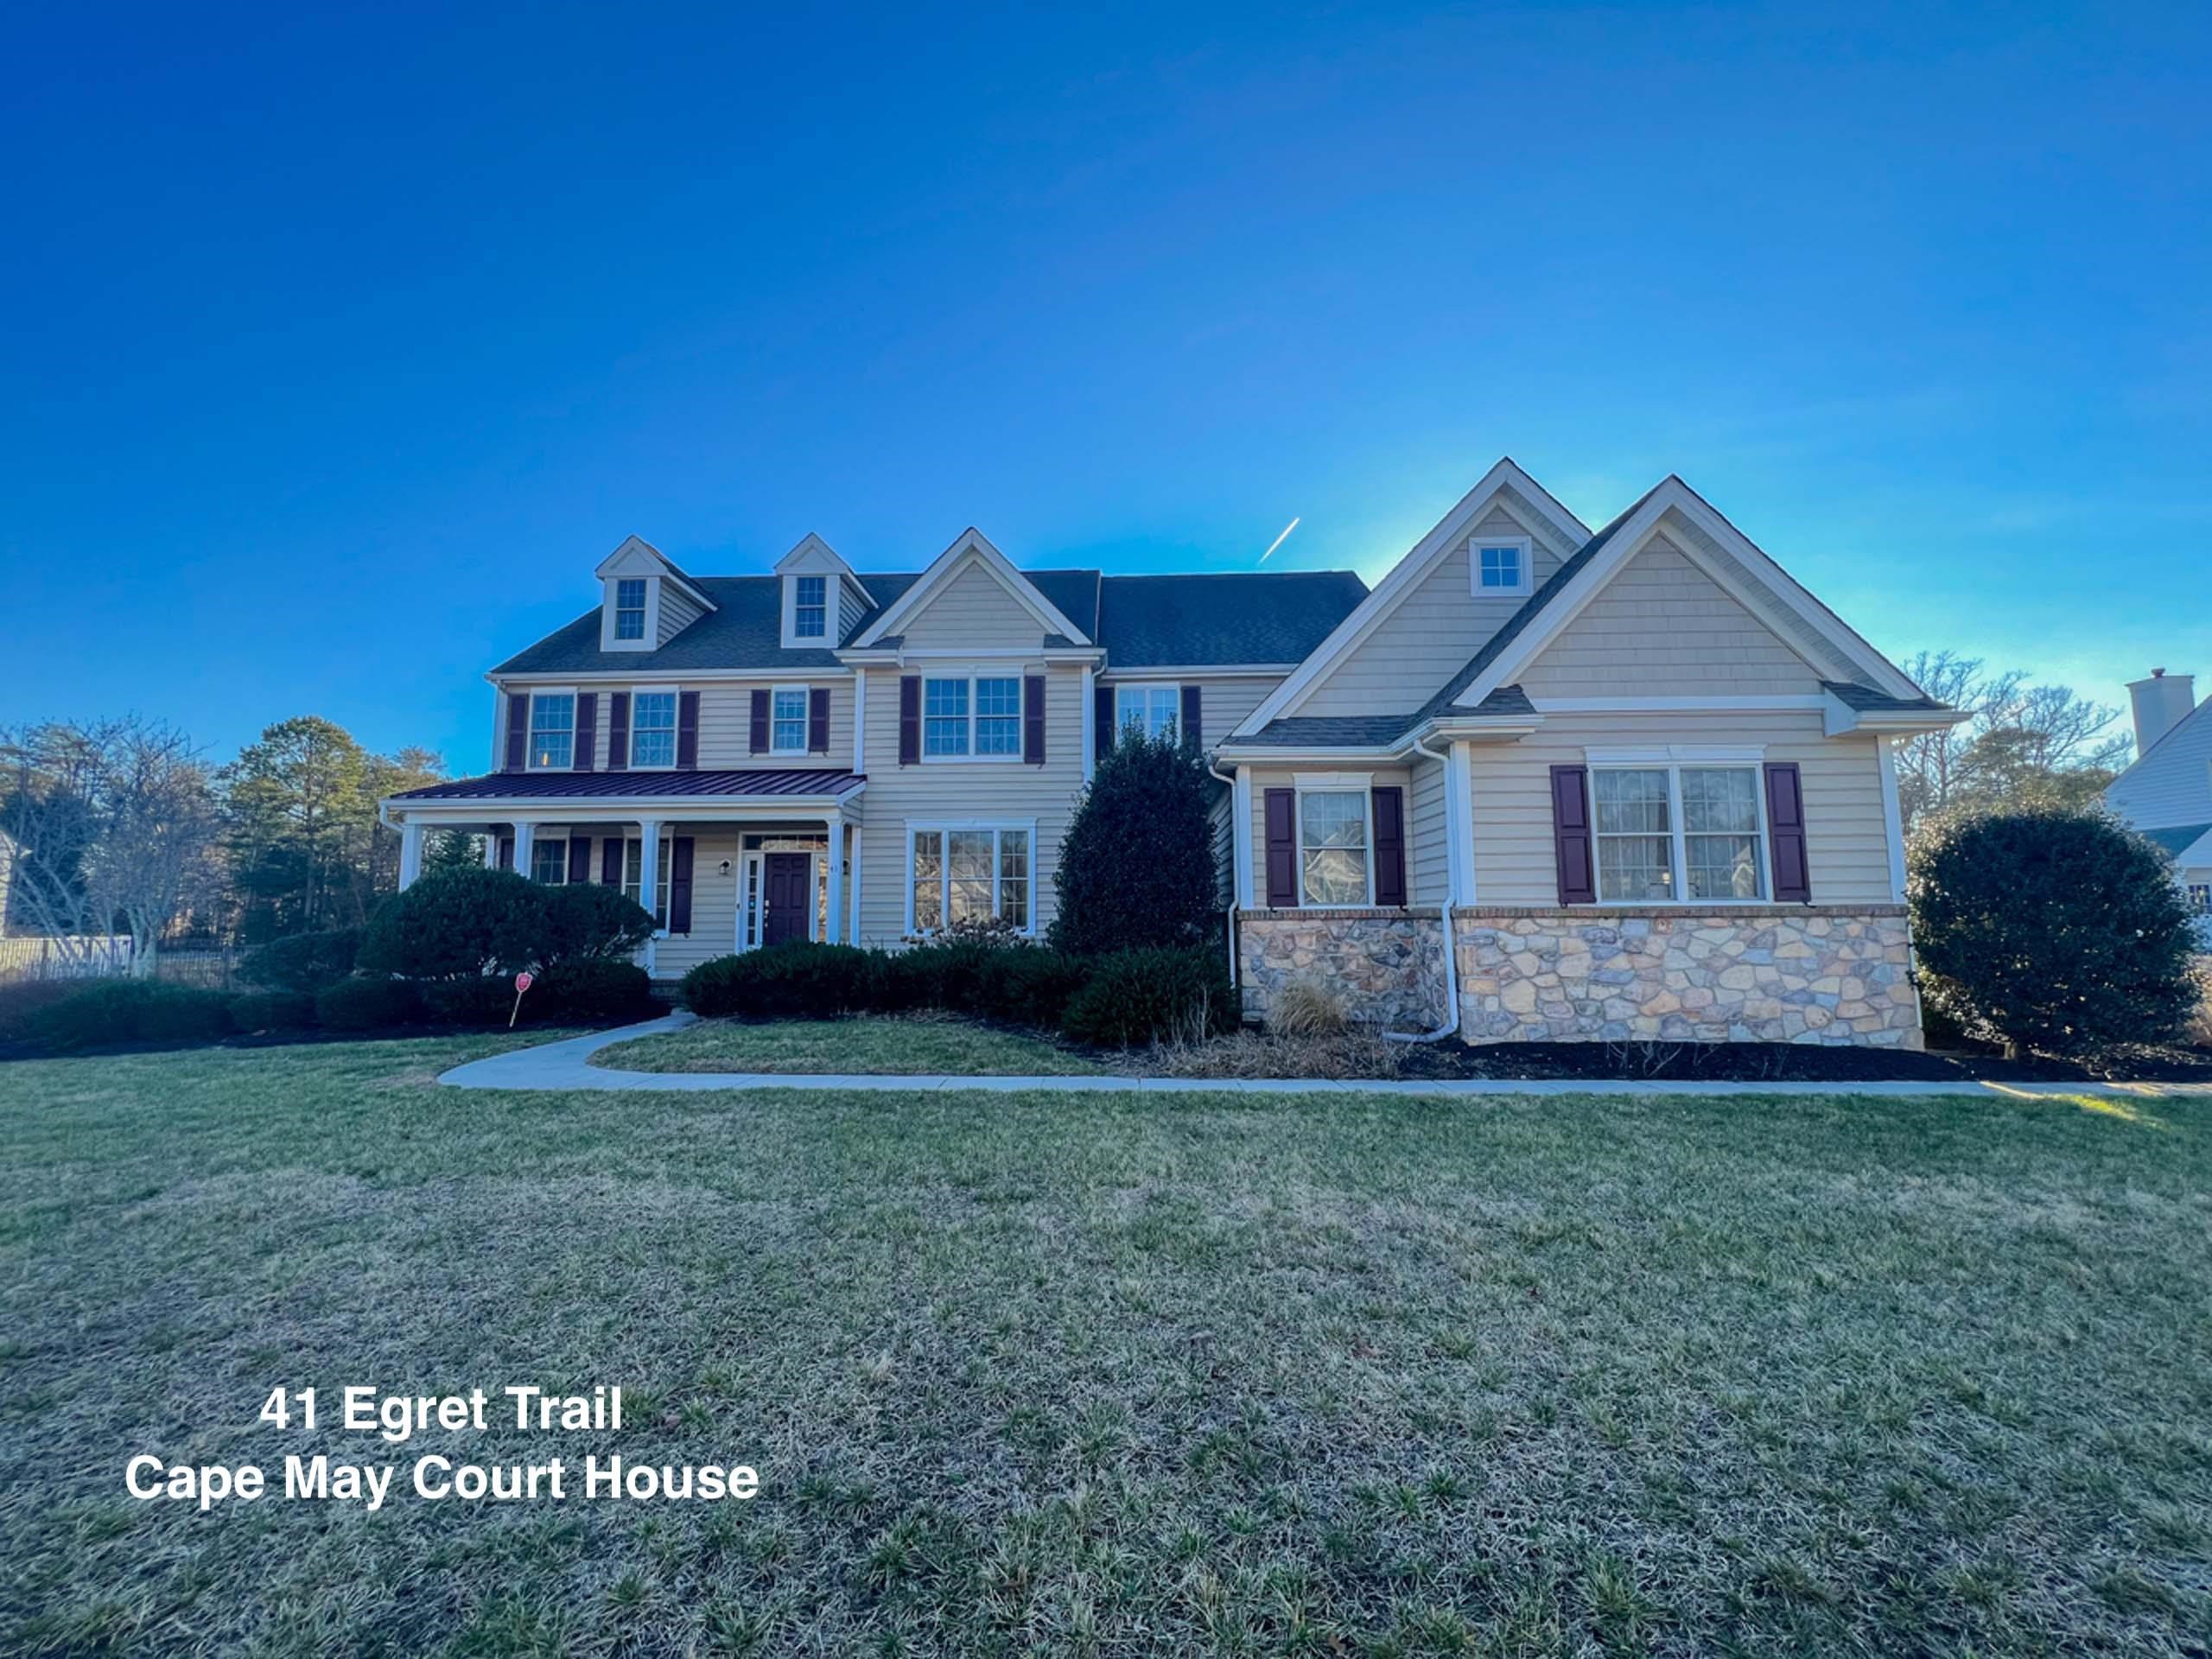 41 Egret Trail, Cape May Court House